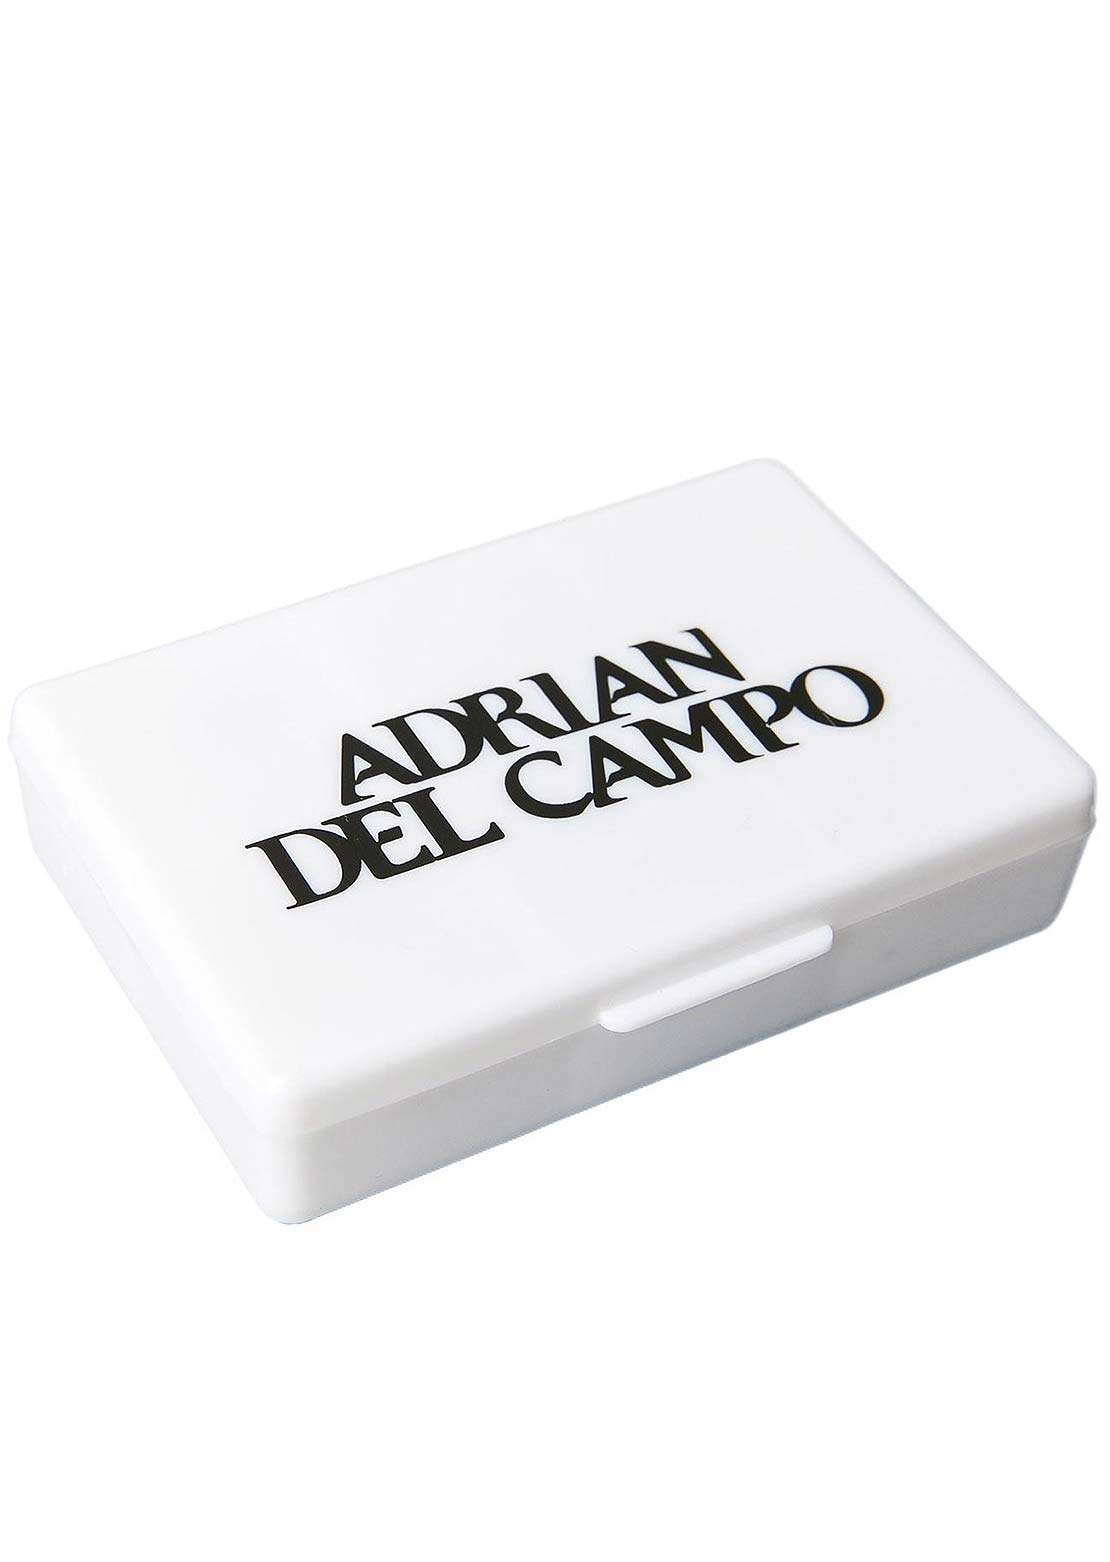 Nothing Skateboards Adrian Del Campo Premium Pro Bearings